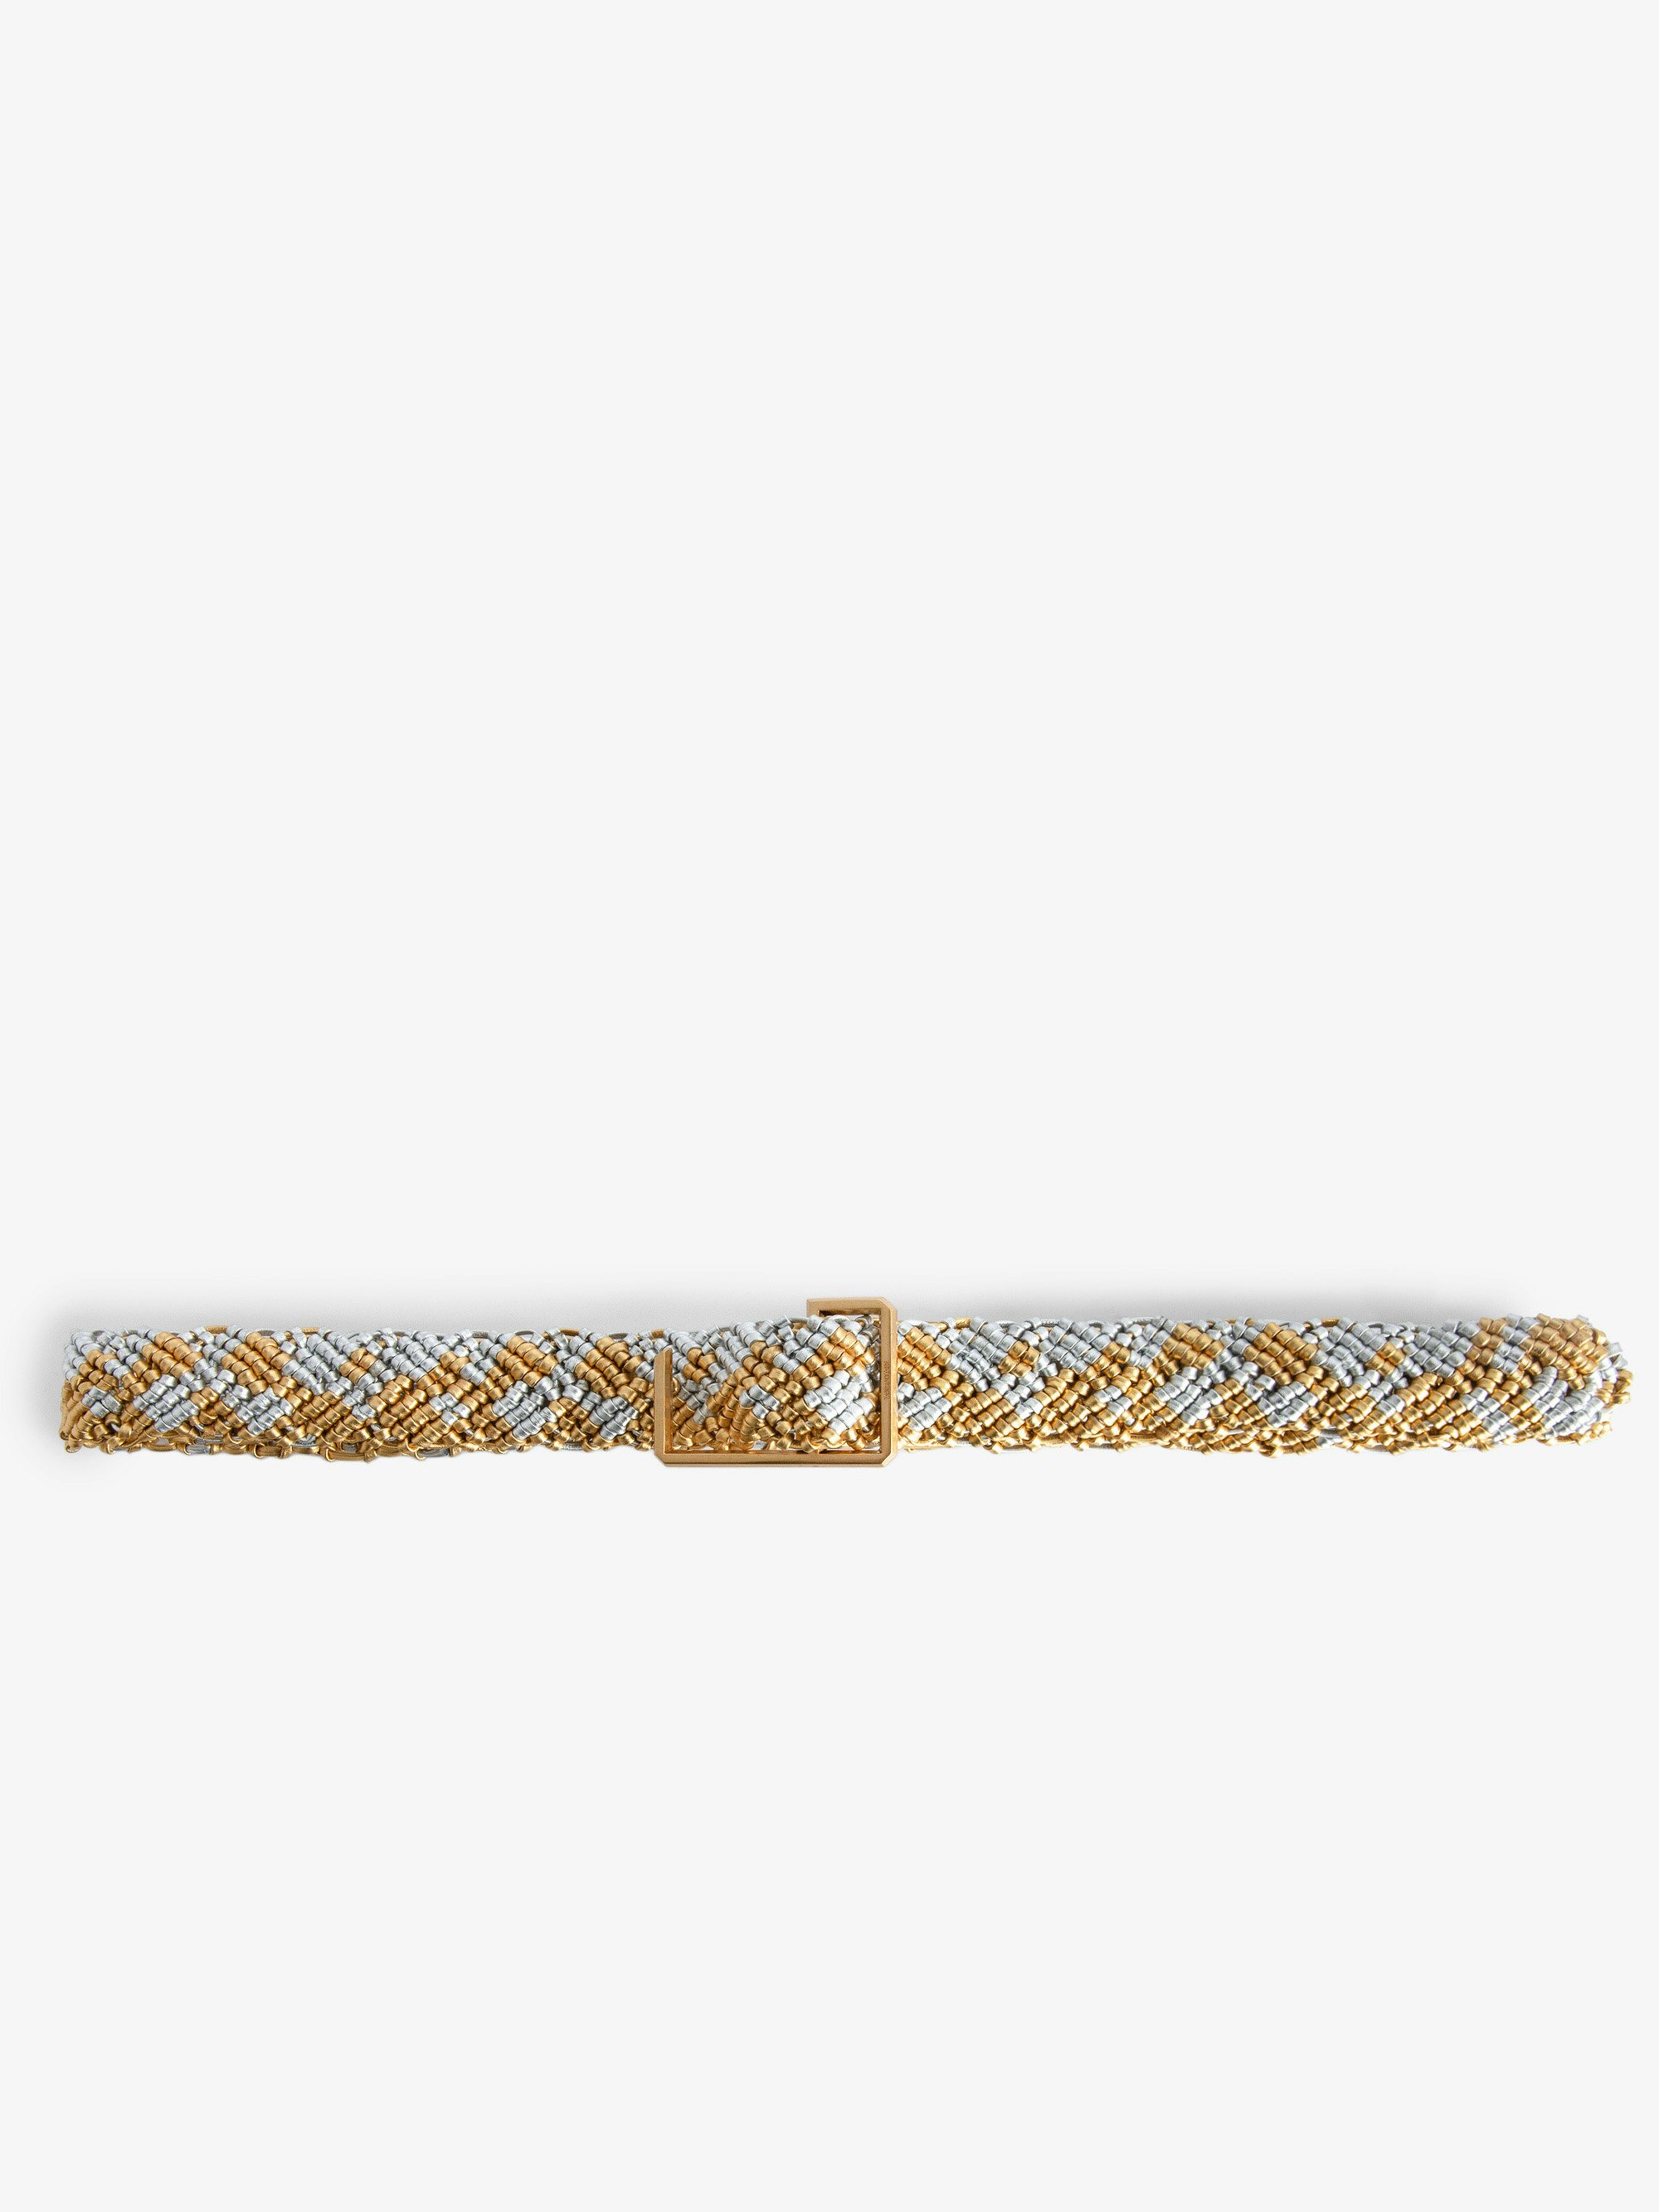 La Cecilia Obsession Belt - Adjustable braided leather belt with C buckle and panels.